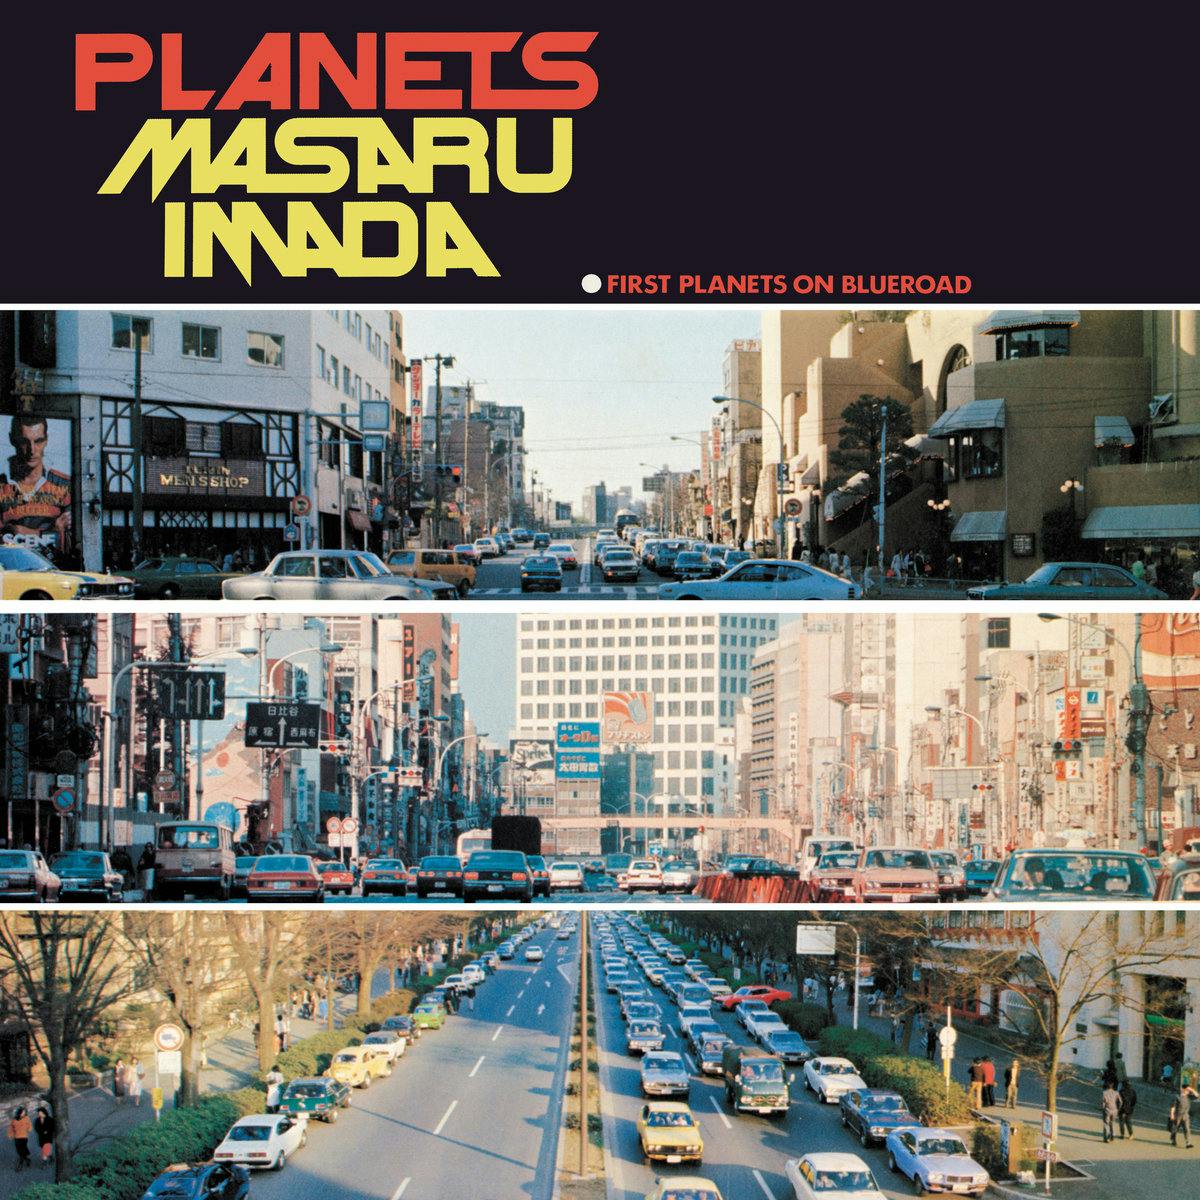 Since 2018, BBE Music has been leading the field in reissuing rare modern jazz from Japan’s golden period spanning the late 60s to the early 80s. The J Jazz Masterclass Series continues to present the finest in Japanese jazz with 'Planets' by Masaru Imada Trio + 1.